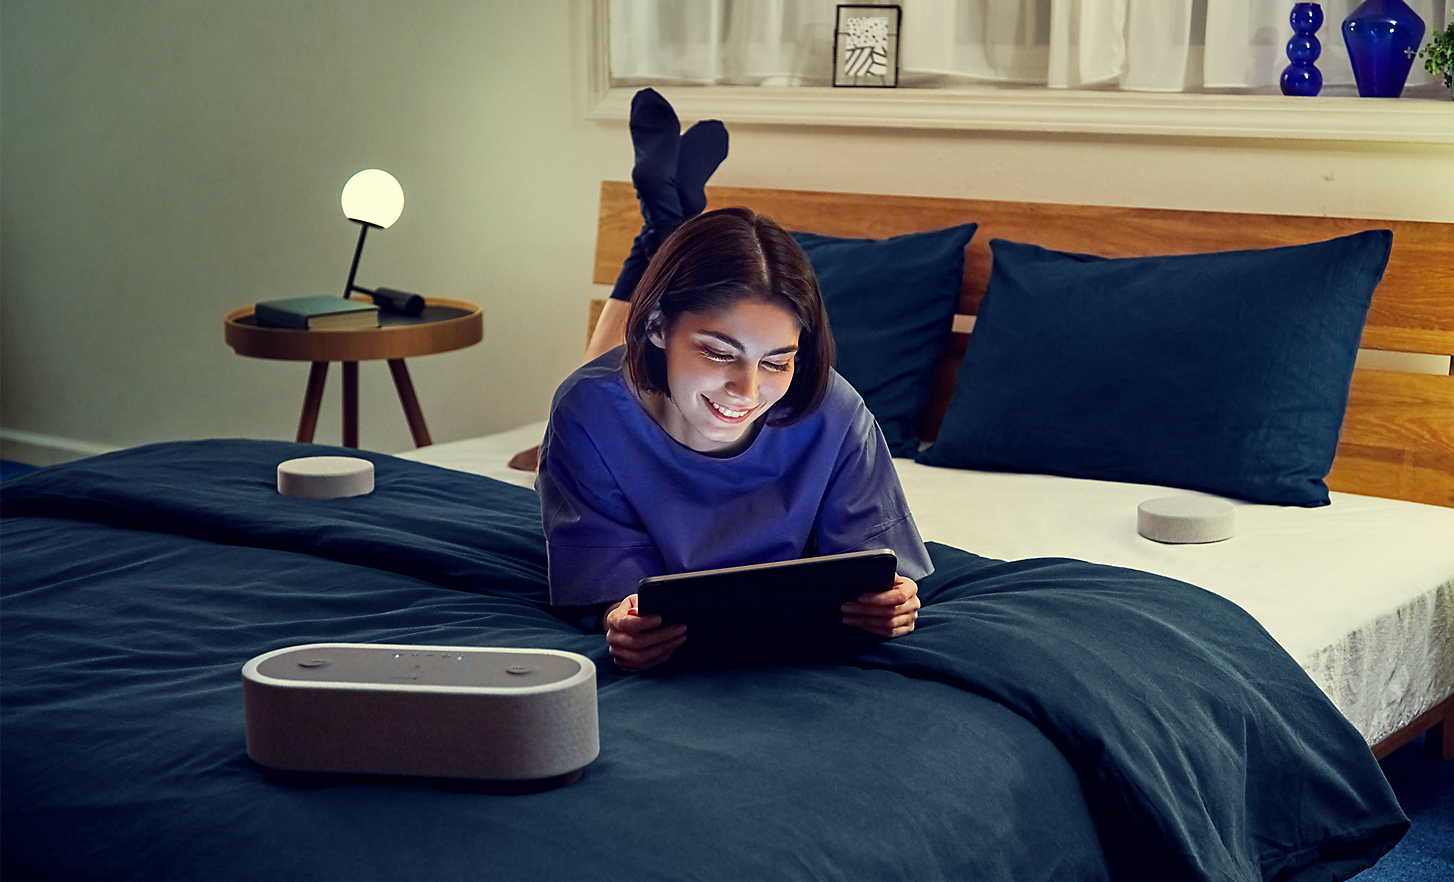 Image of a person lying on a bed watching a tablet, surrounded by the three HT-AX7 speakers